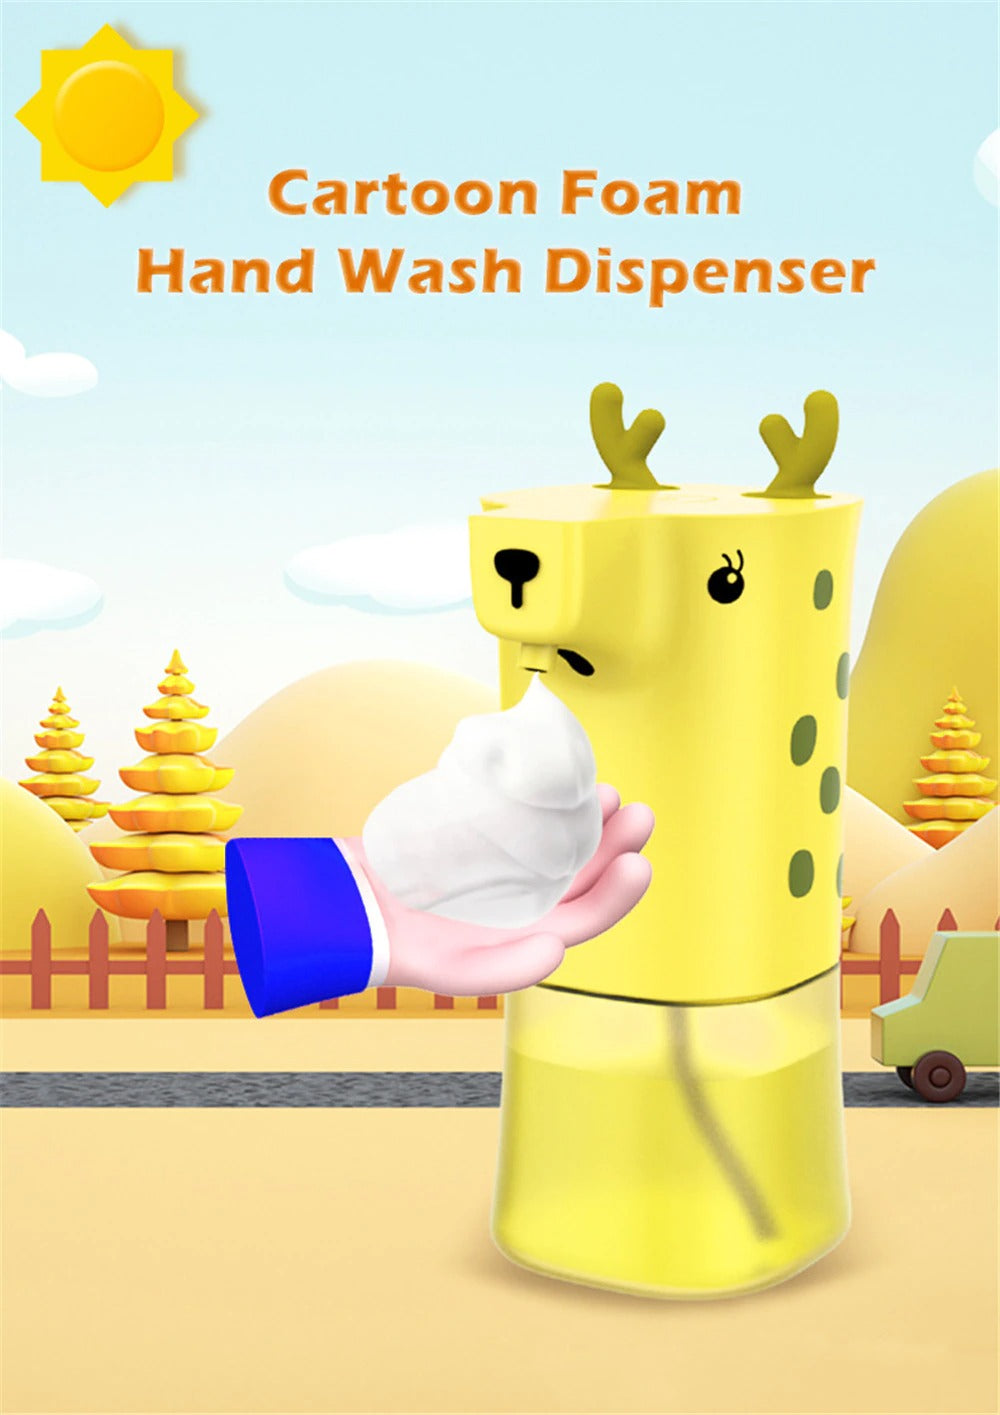 A kids soap dispenser which looks like a cartoon giraffe. There is also an emoji style hand under the nozzle which shows foam being dispensed. There is text which reads, ‘cartoon foam hand wash dispenser.' The background shows a cartoon style fence and trees.